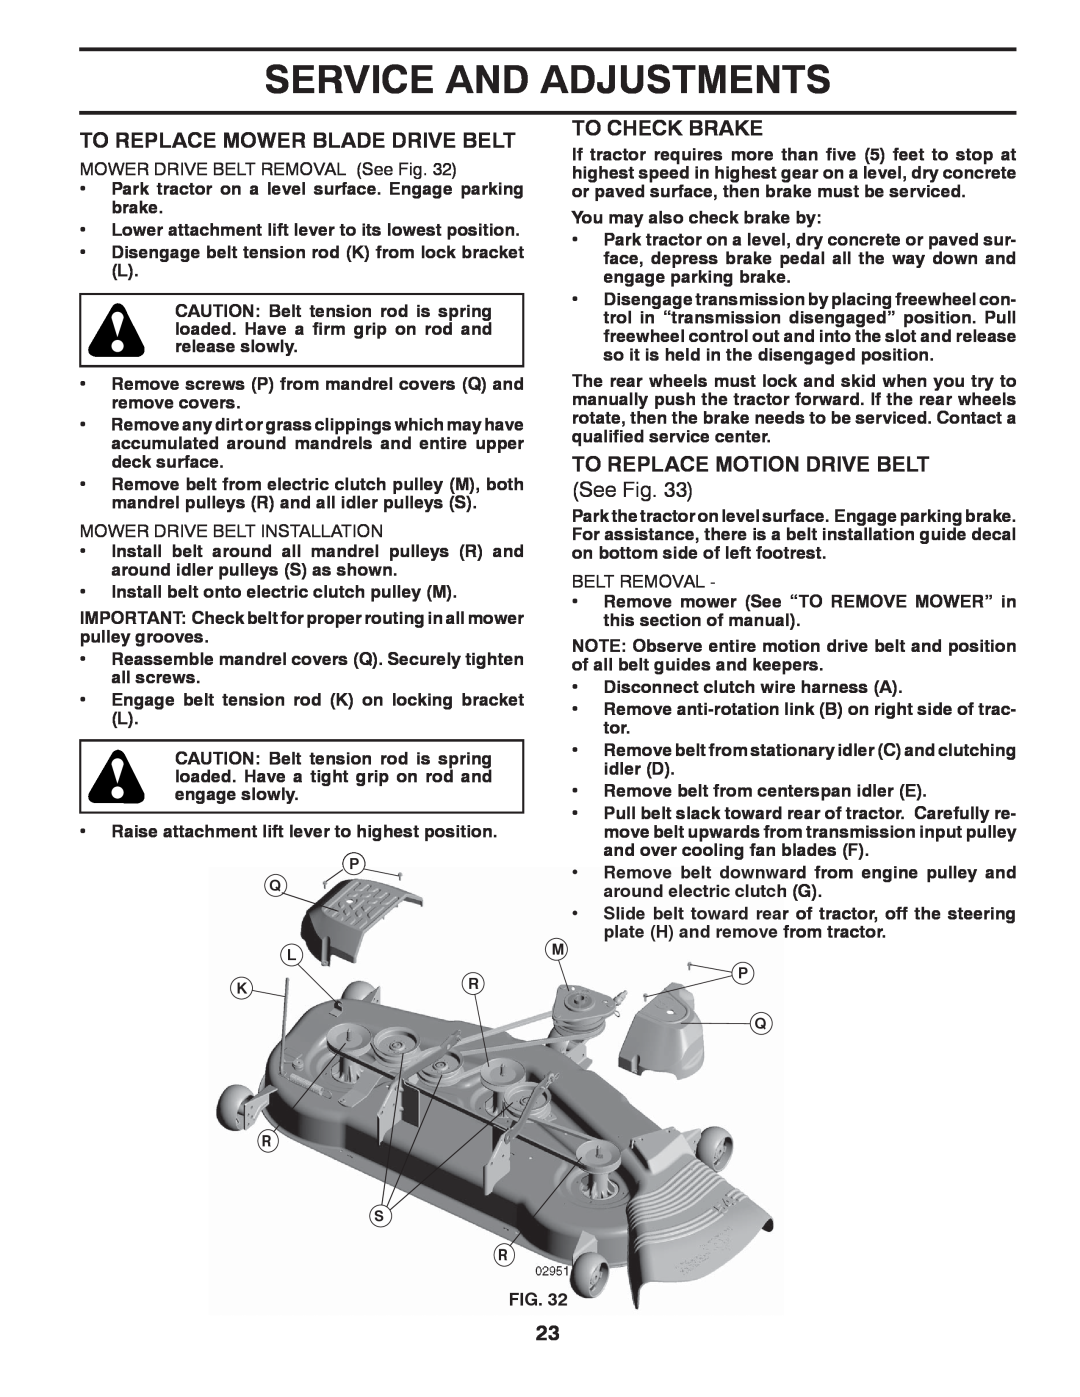 Poulan 96042006001 manual To Replace Mower Blade Drive Belt, To Check Brake, To Replace Motion Drive Belt, See Fig 